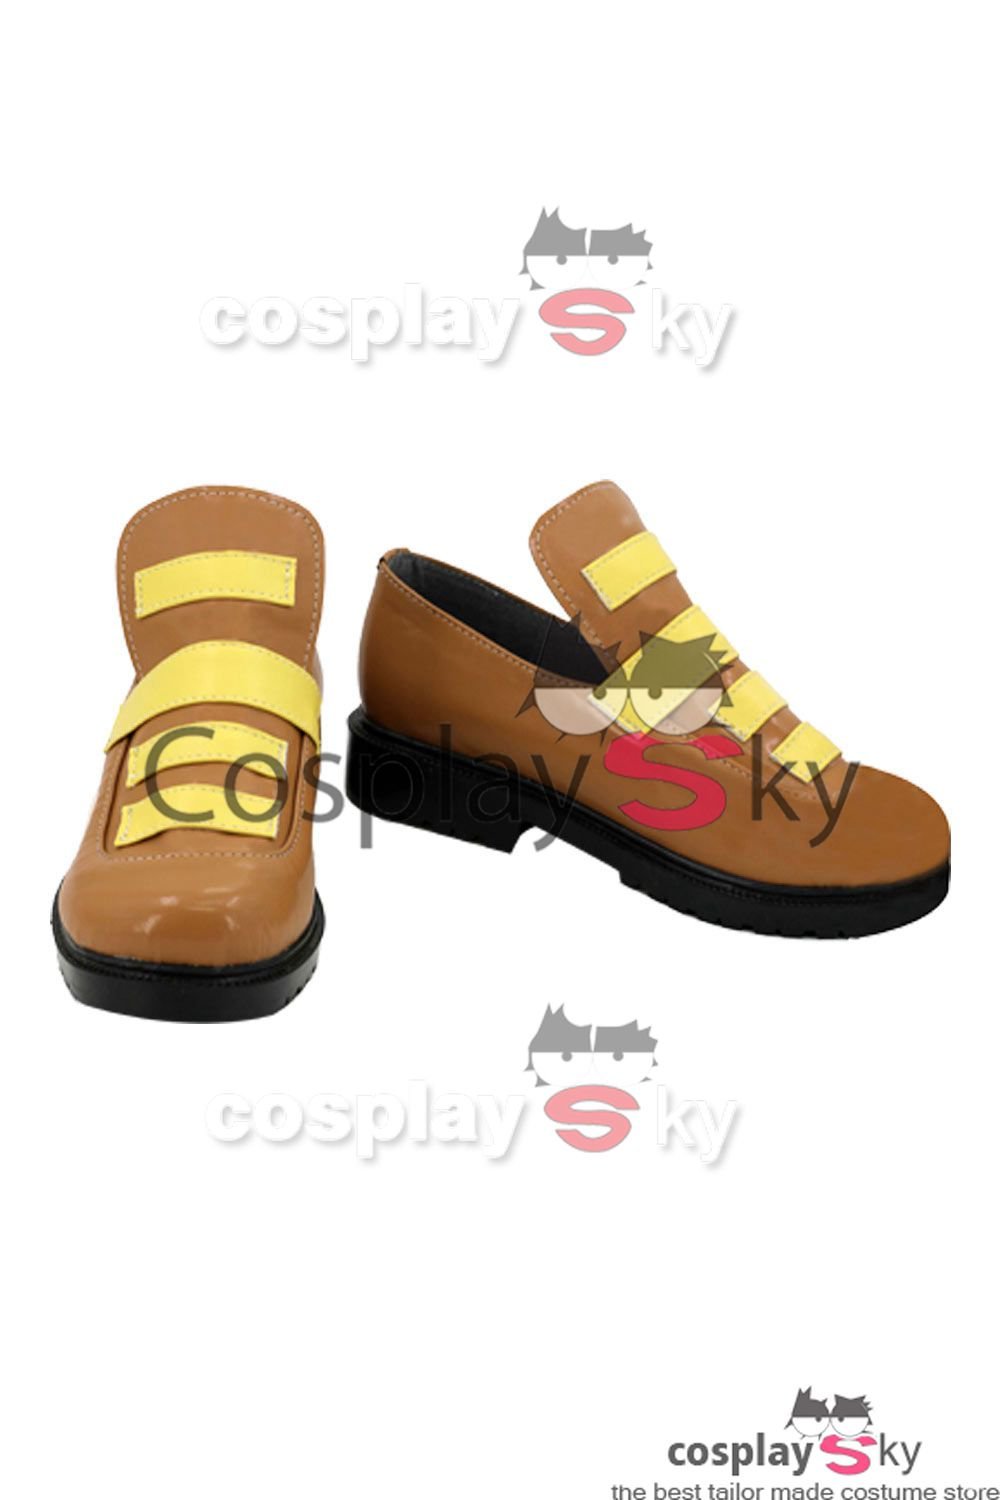 Mystic Messenger 707 EXTREME Saeyoung/Luciel Choi 7 Cosplay Shoes